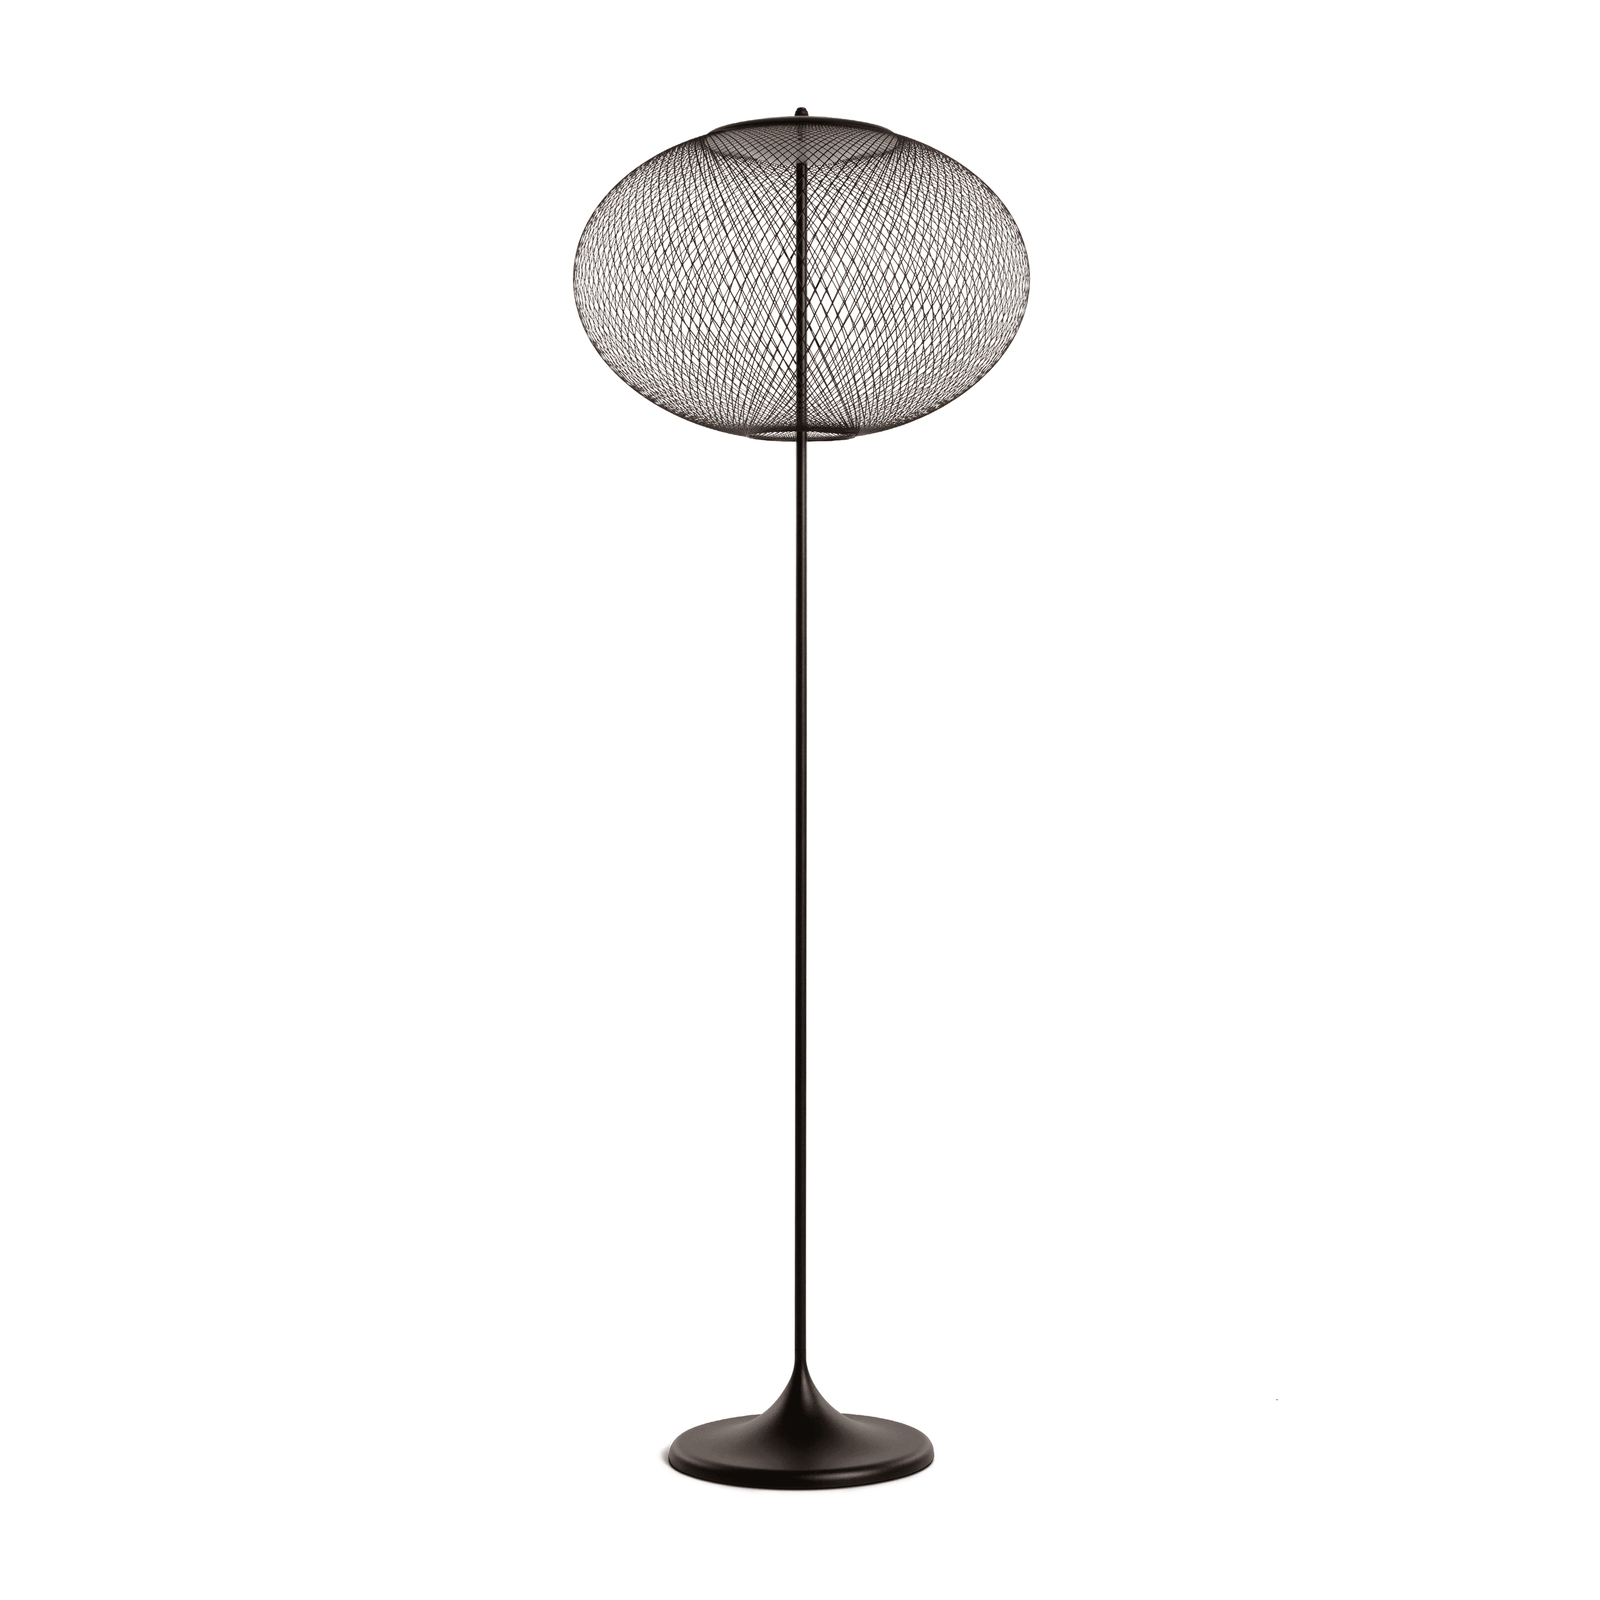 NR2 Floor Lamp - Curated Lighting $1000-$2000, Black, floor, in stock and ready to ship, Moooi, White